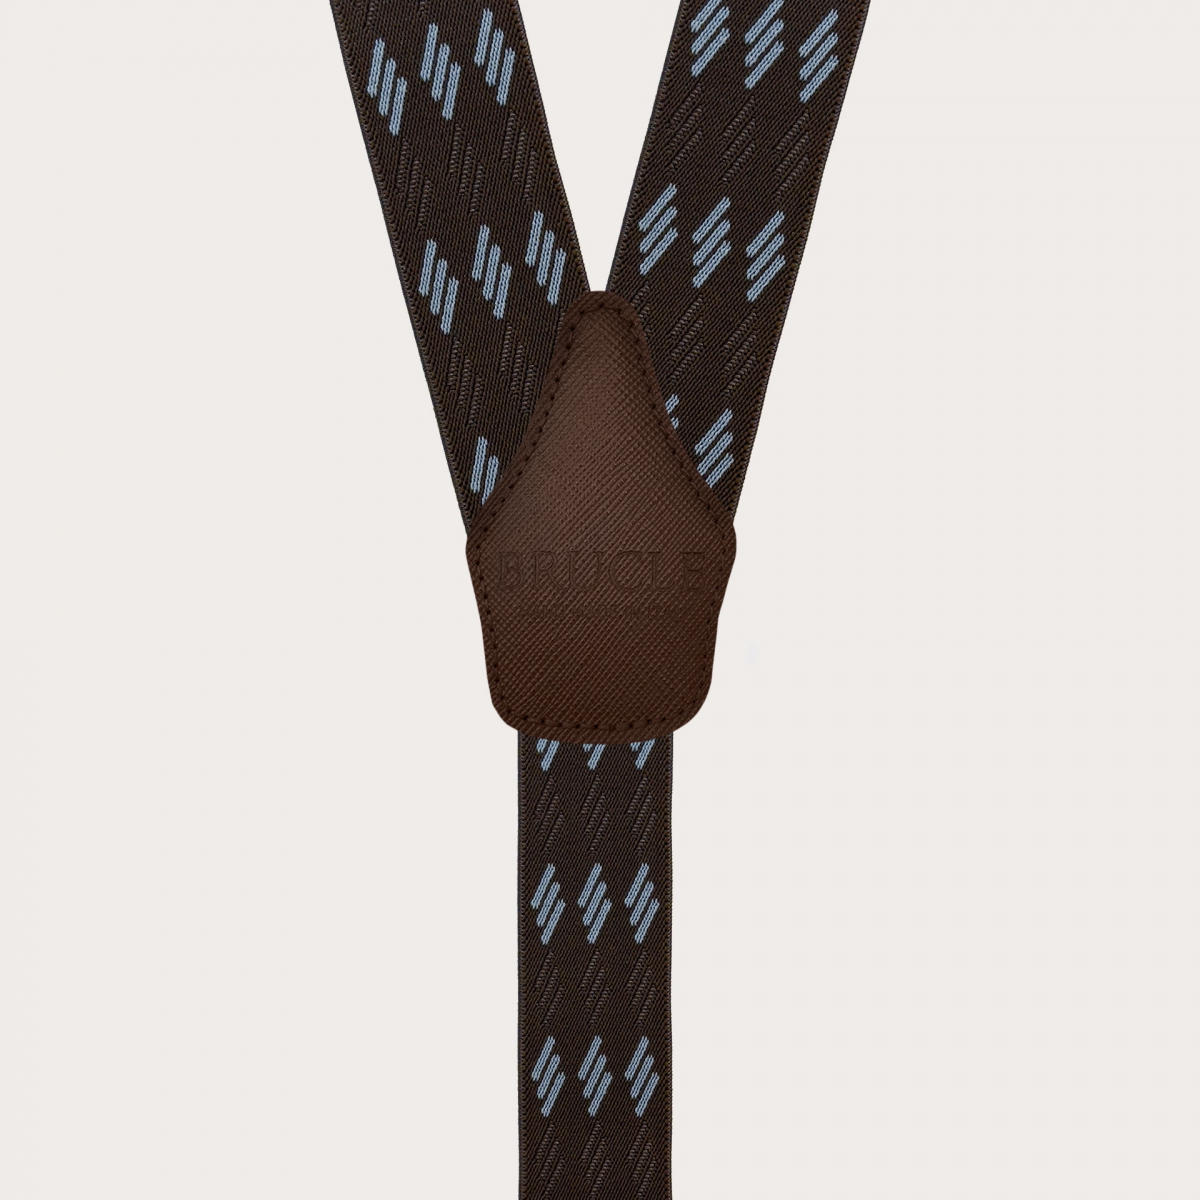 Brown elastic suspenders with blue stripes for buttons or clips